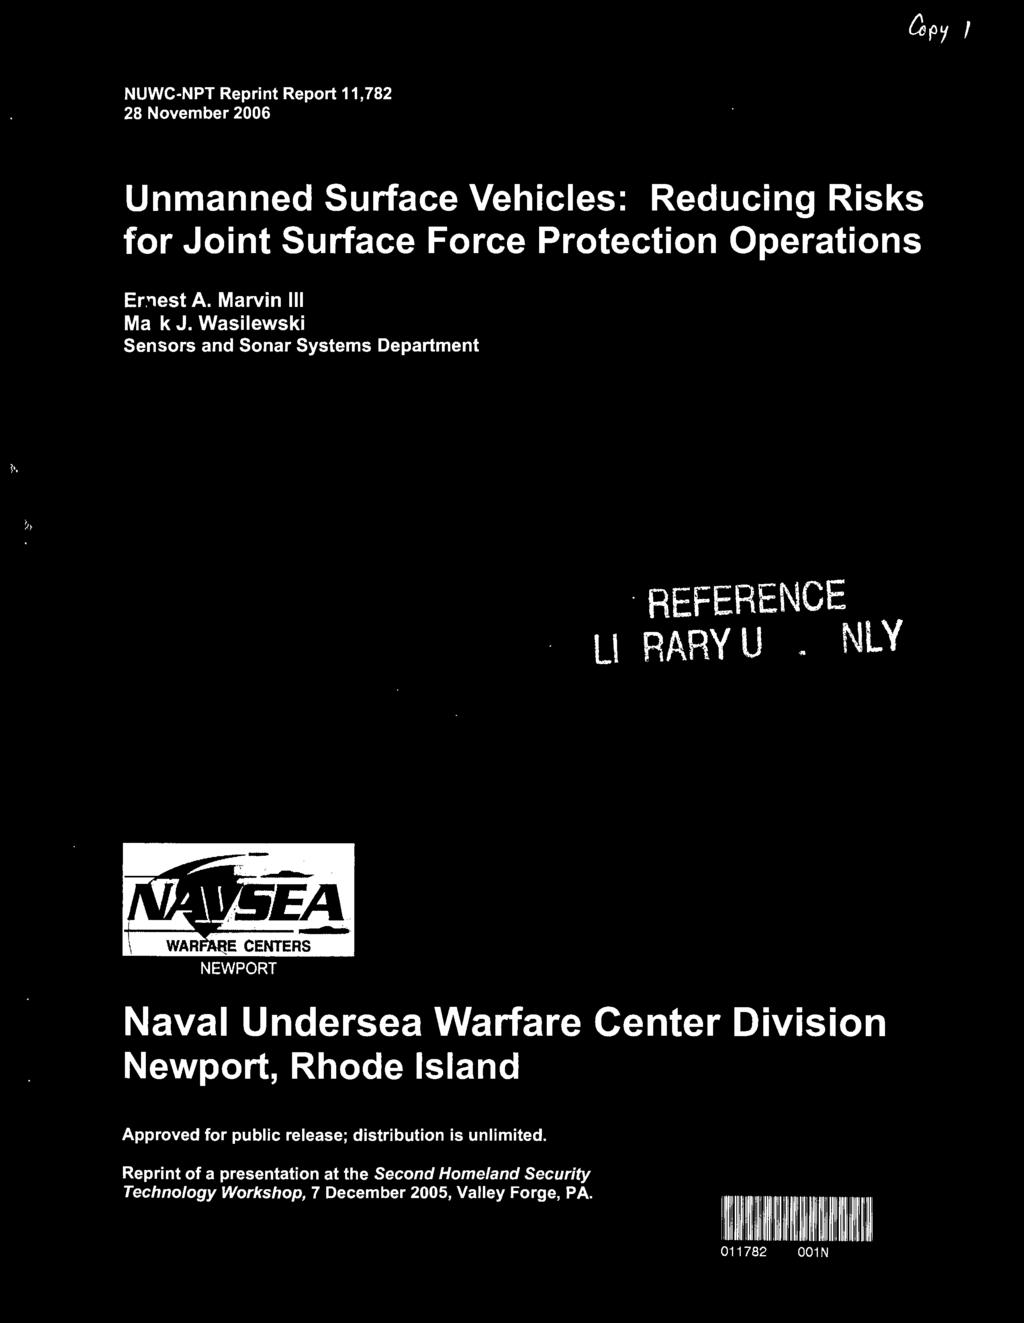 Wasilewski Sensors and Sonar Systems Department REFERENCE L\ RARY U NLY NEWPORT Naval Undersea Warfare Center Division